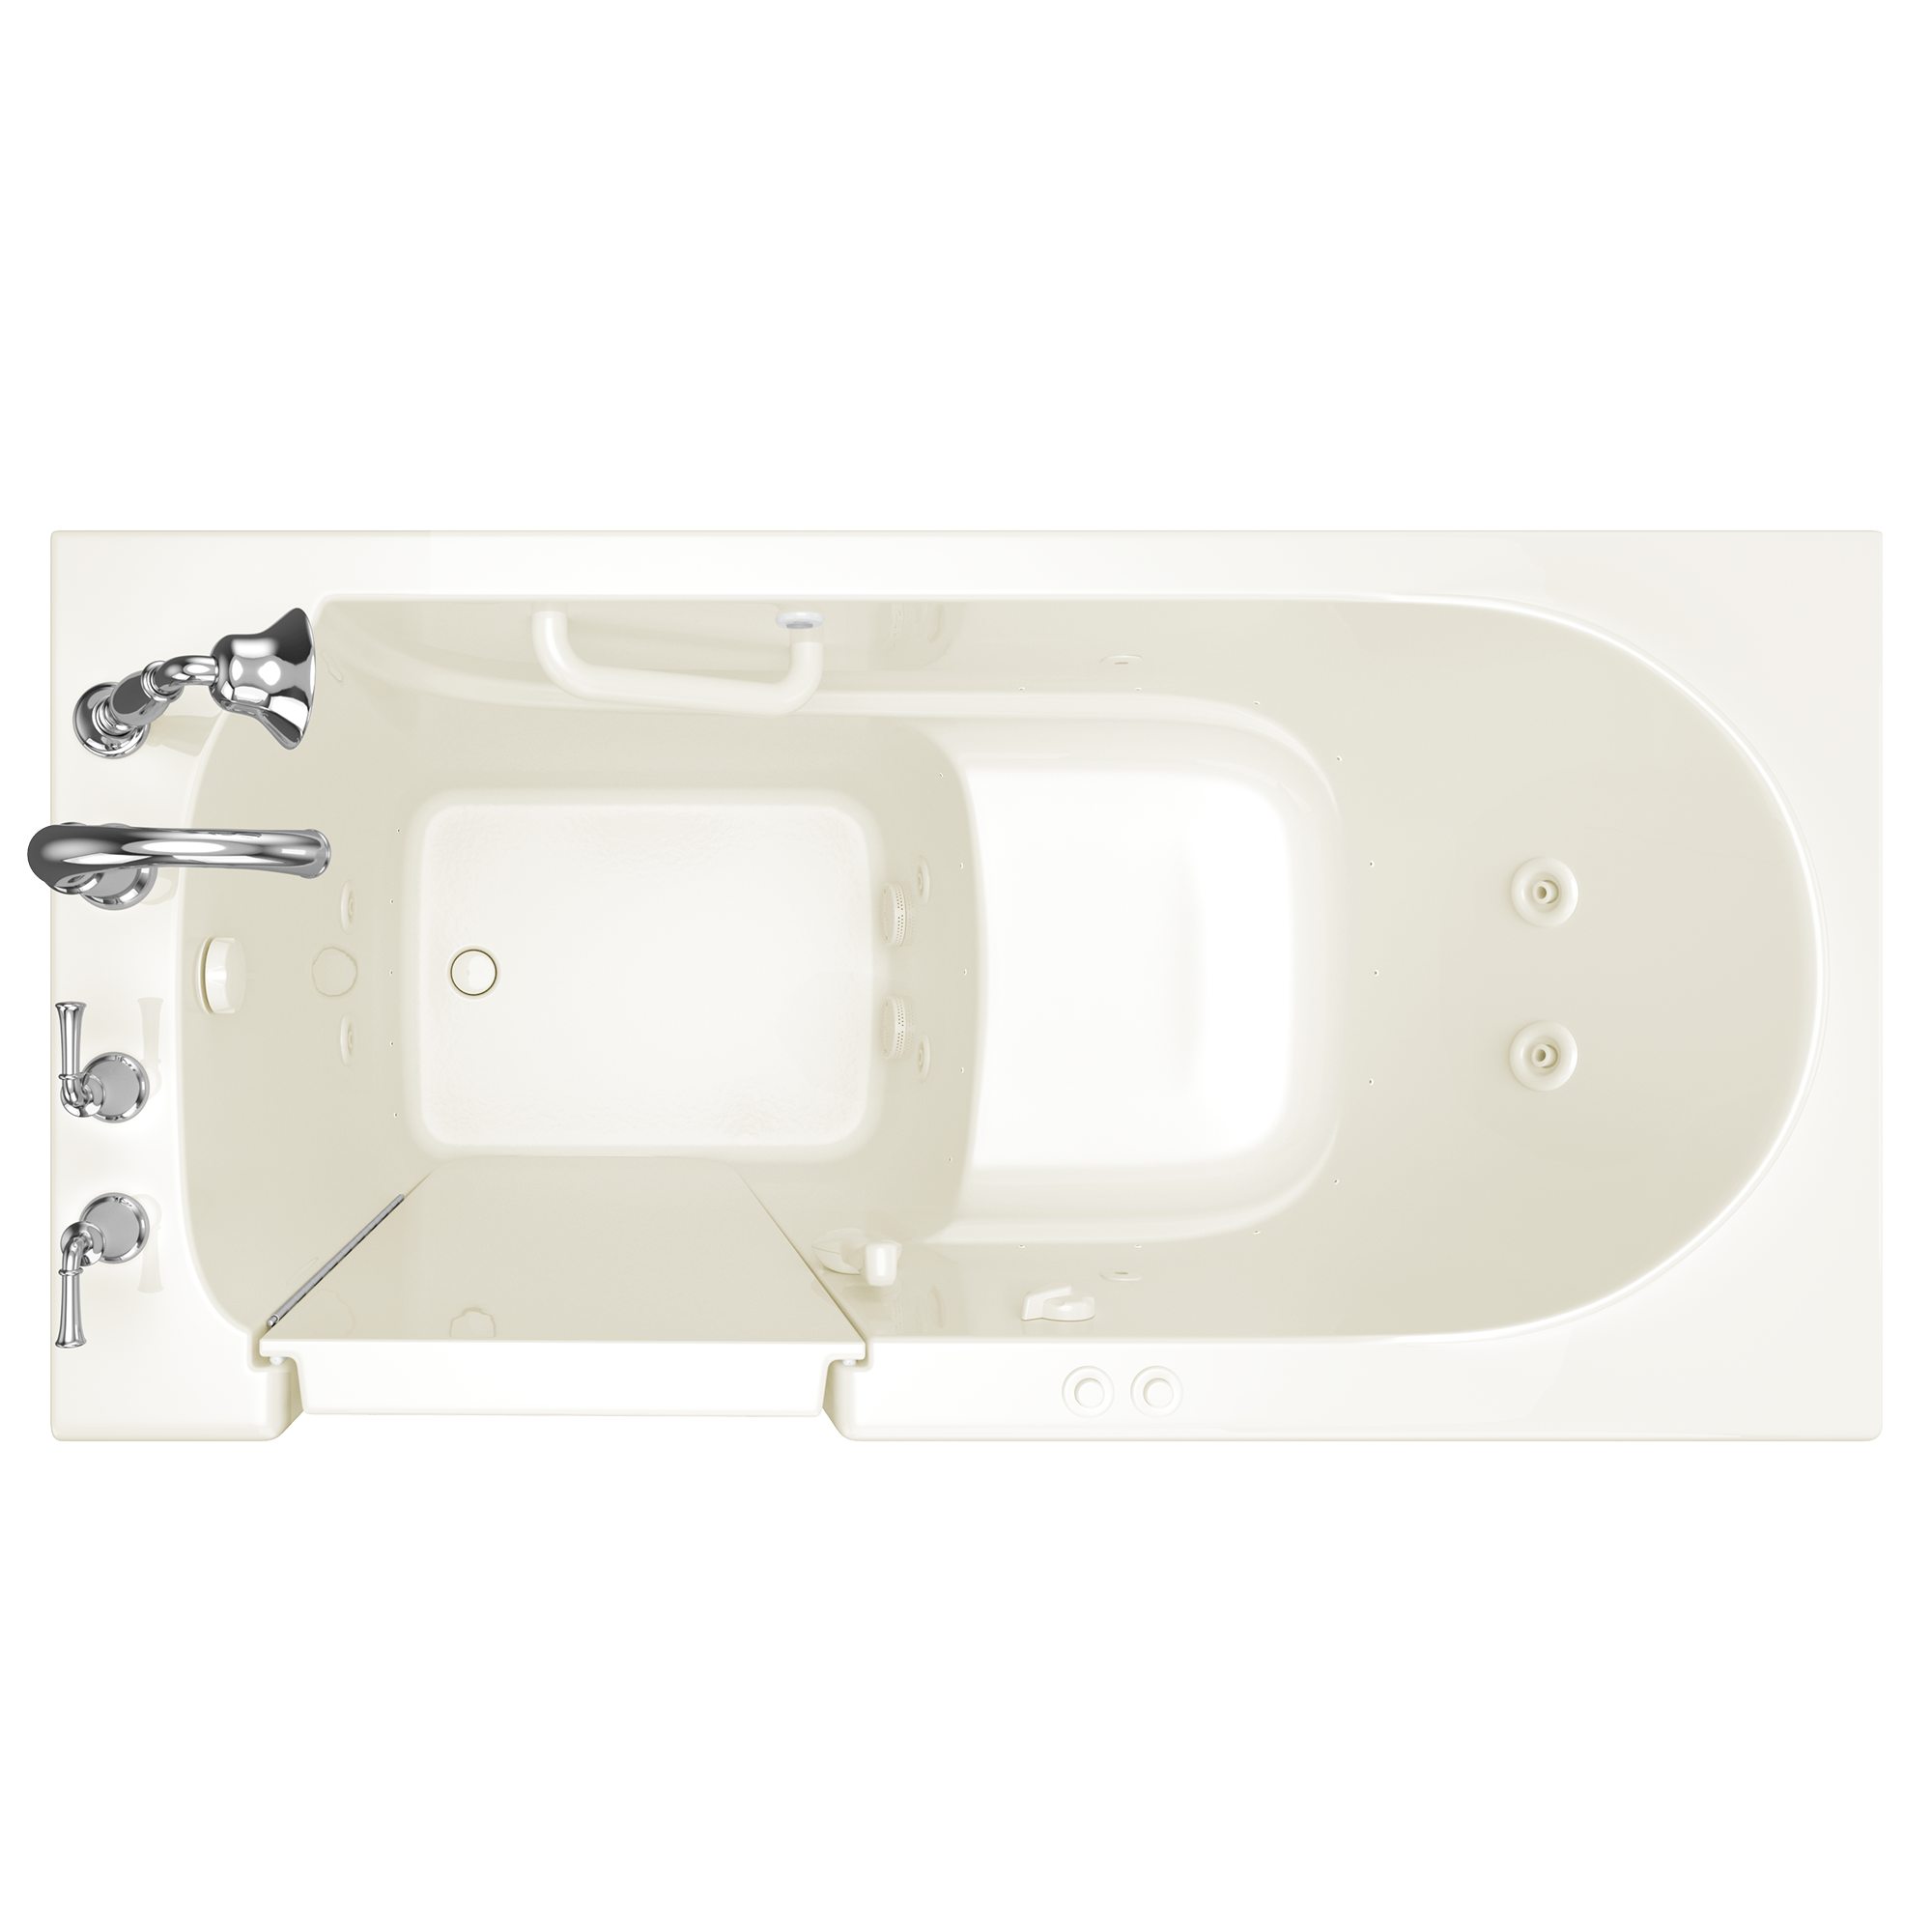 Gelcoat Value Series 30 x 60  Inch Walk in Tub With Combination Air Spa and Whirlpool Systems   Left Hand Drain With Faucet WIB LINEN